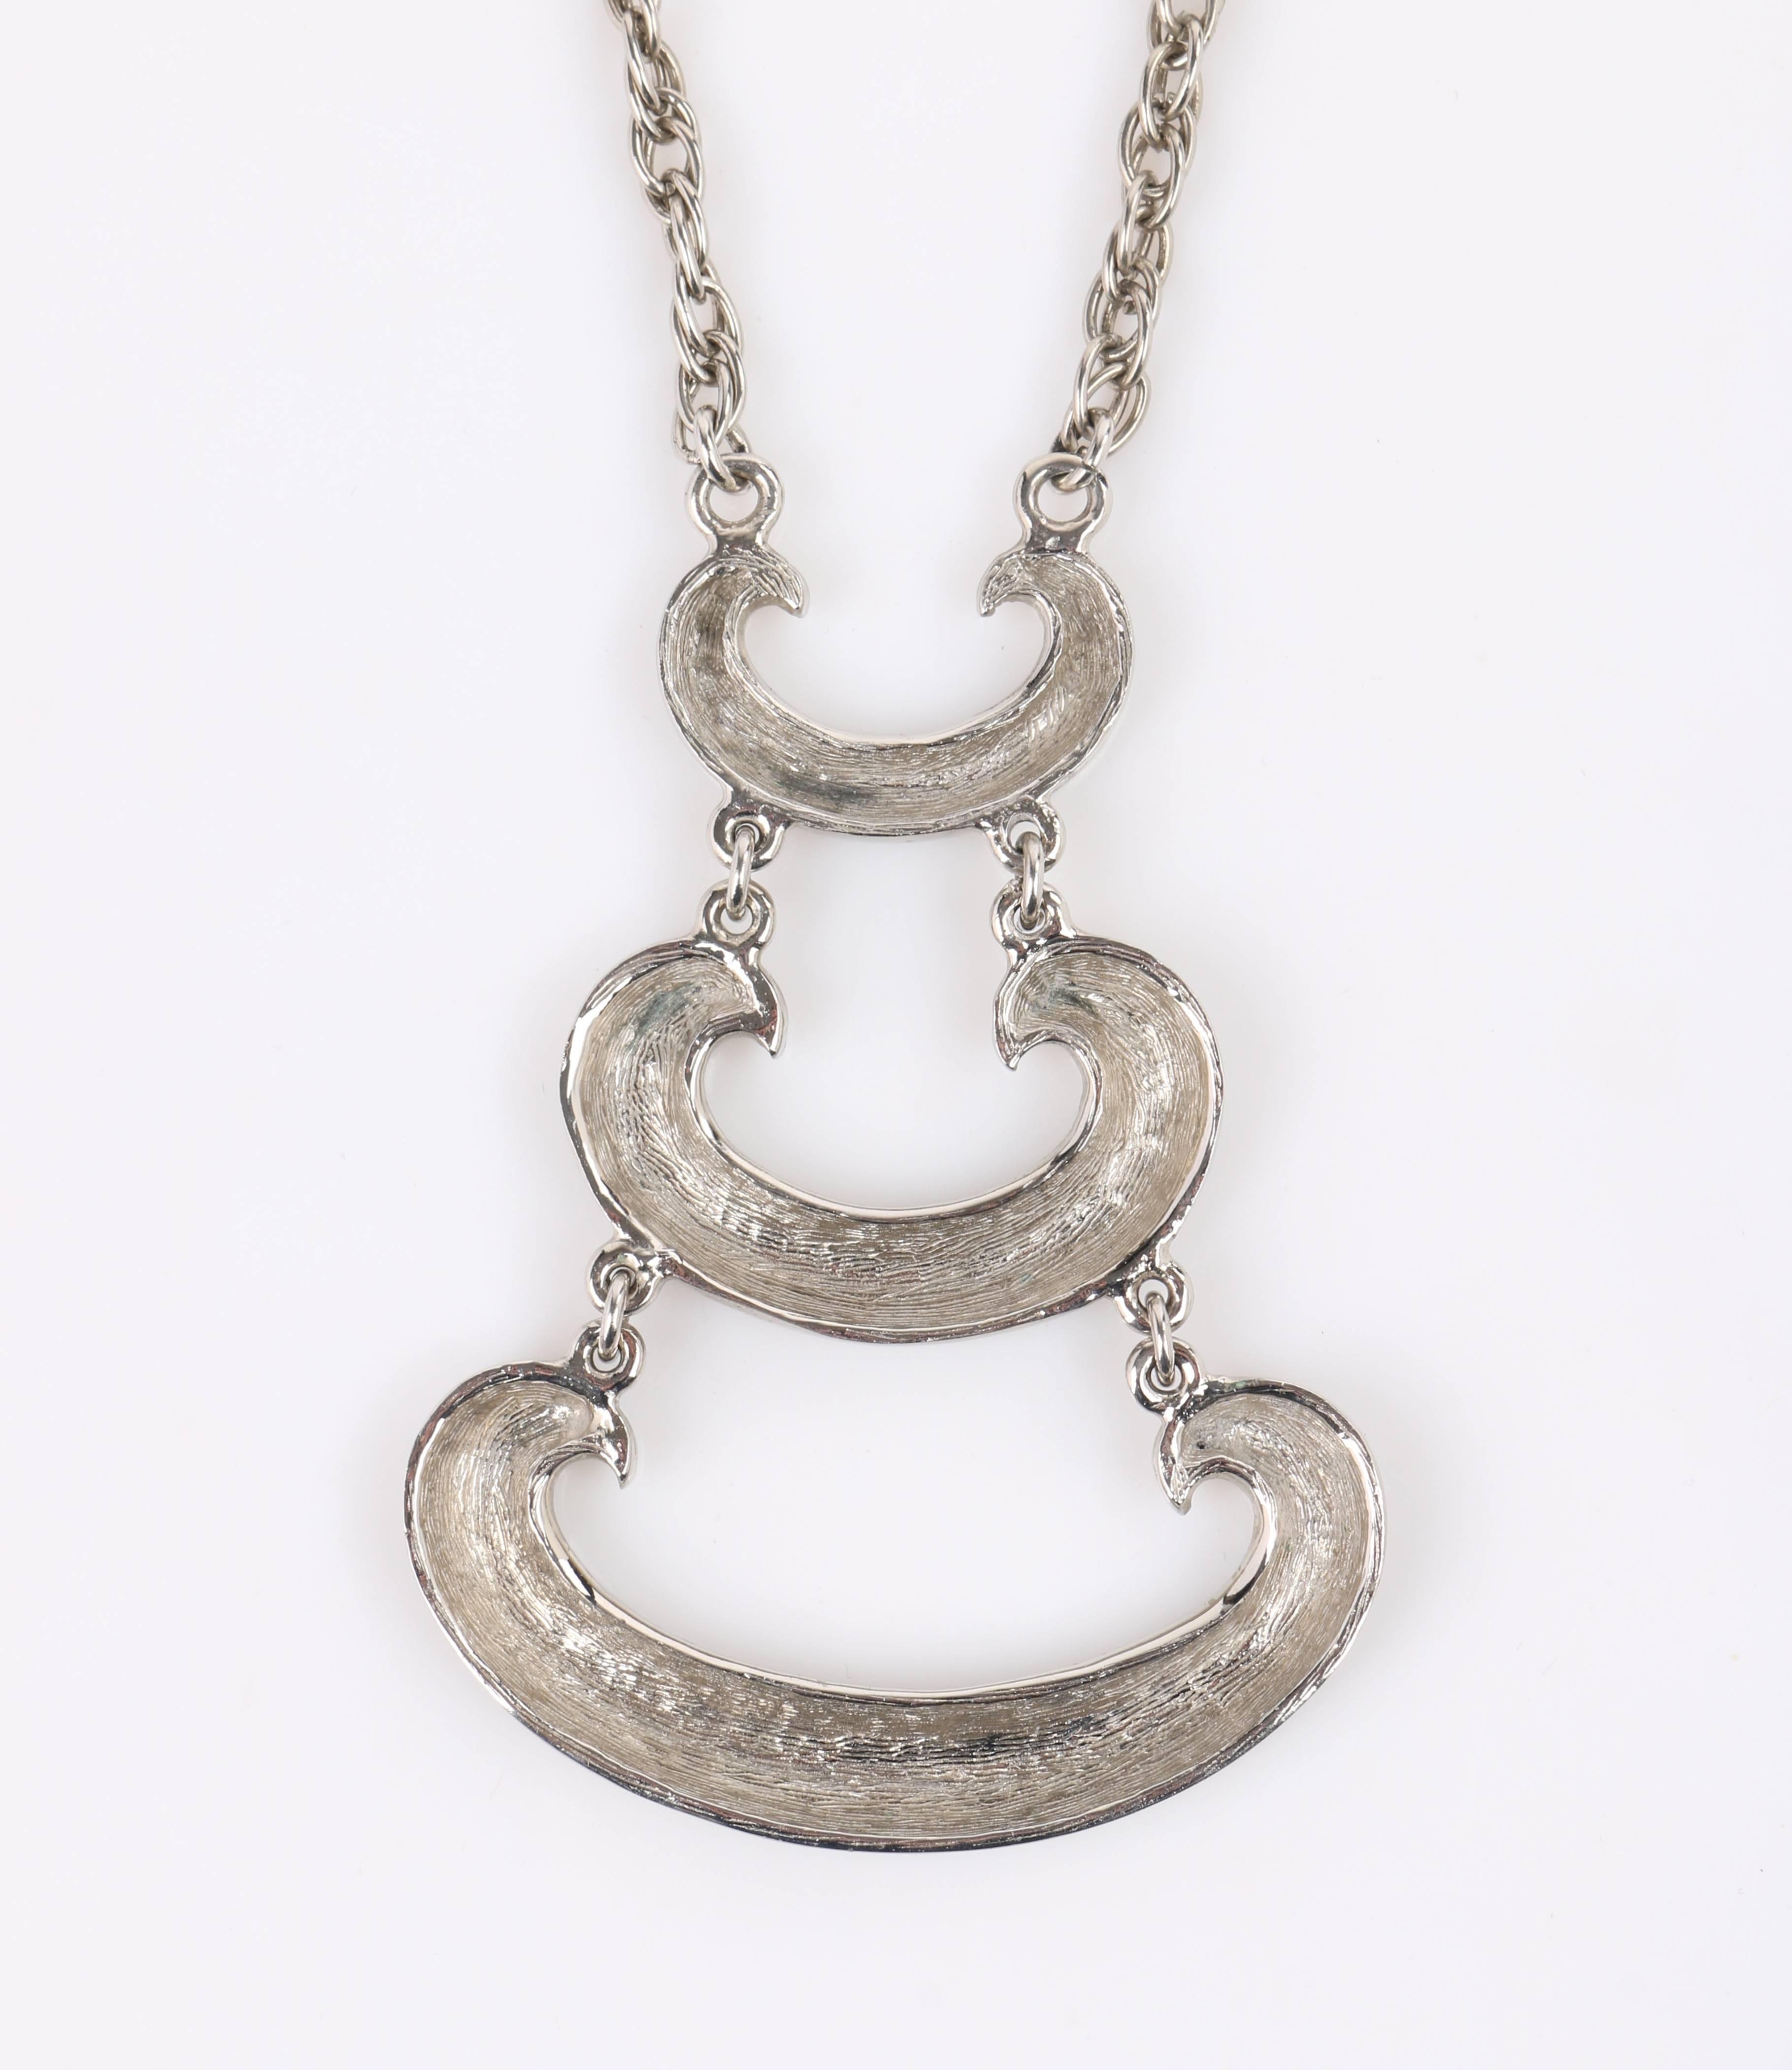 c.1960's Large Polished Silver Modernist Tiered Pendant Statement Necklace For Sale 2